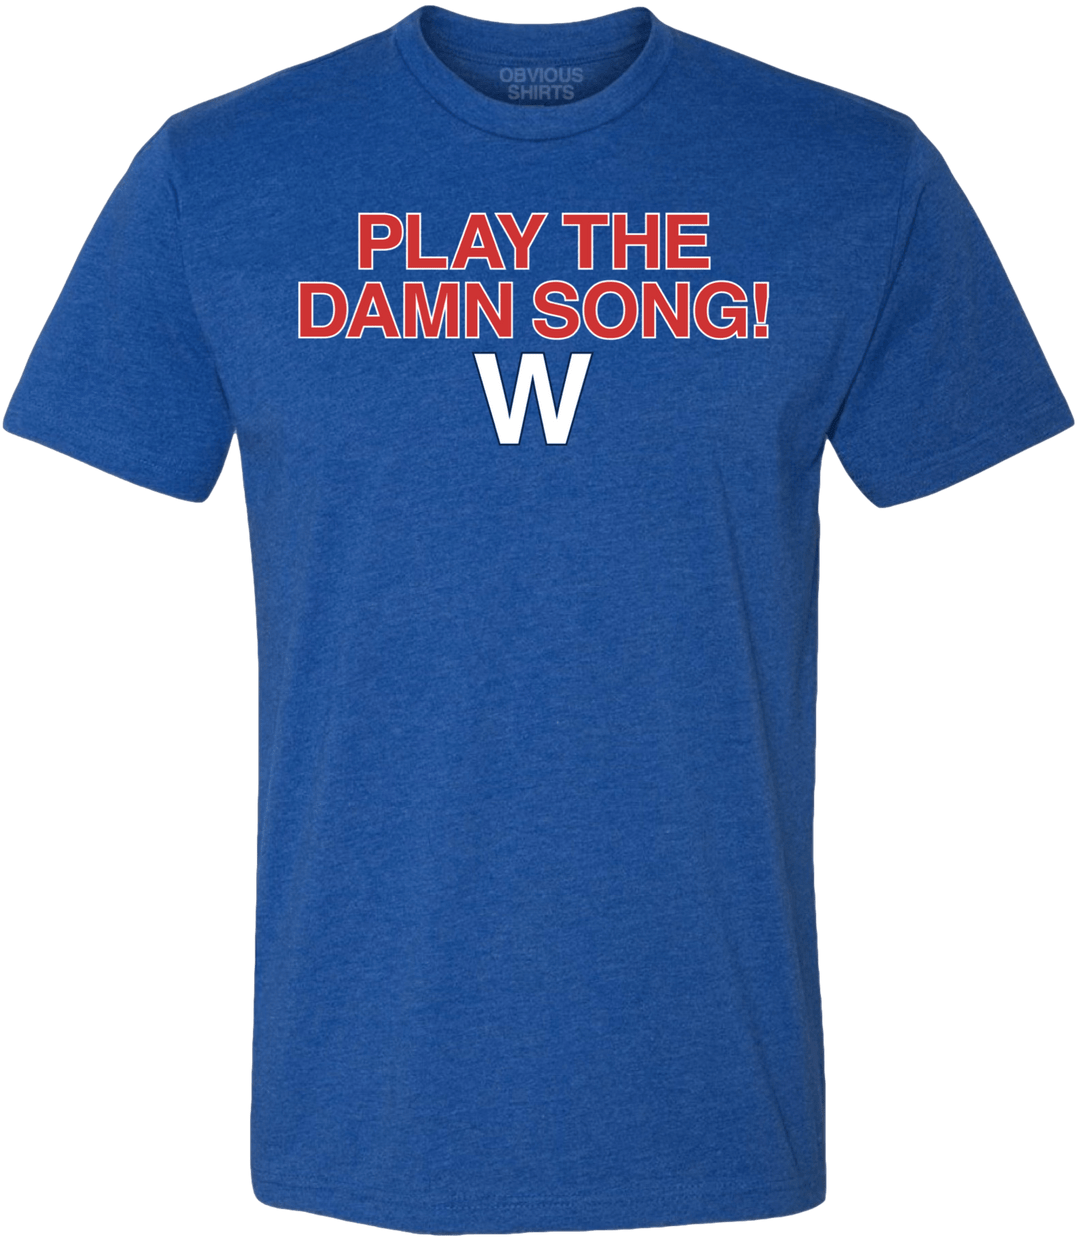 PLAY THE DAMN SONG! - OBVIOUS SHIRTS